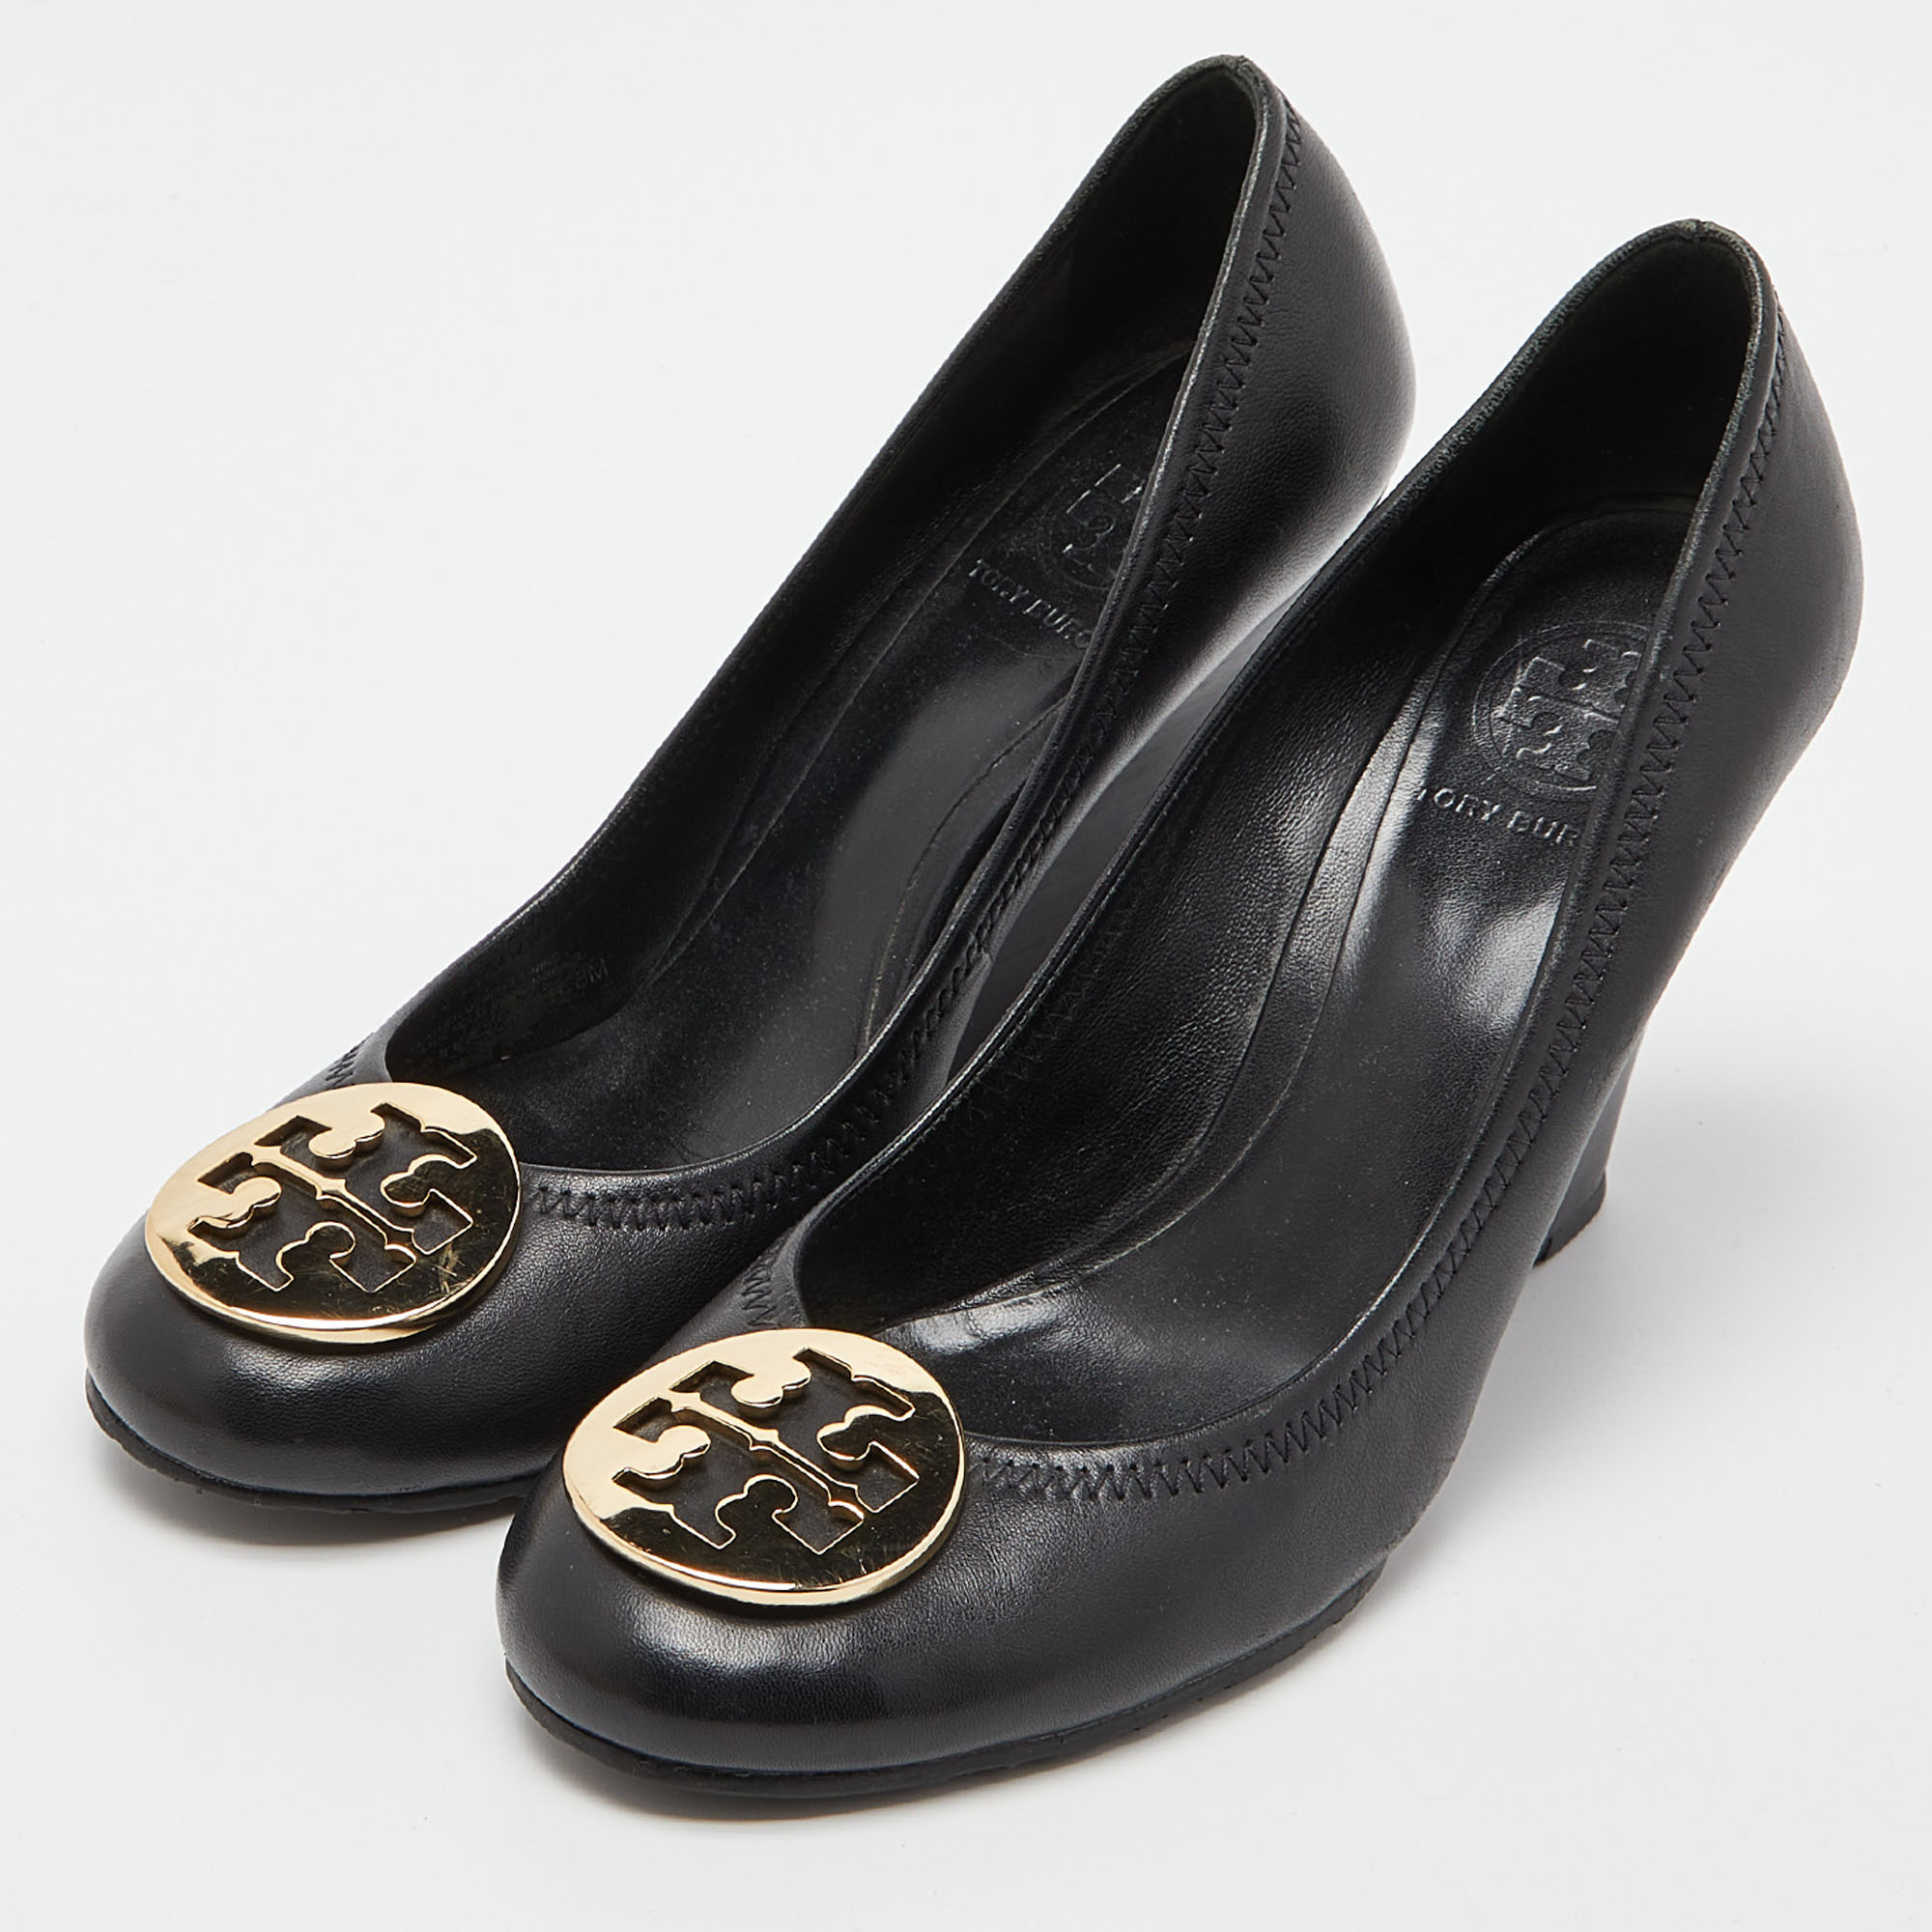 

Tory Burch Black Leather Sally Wedge Pumps Size